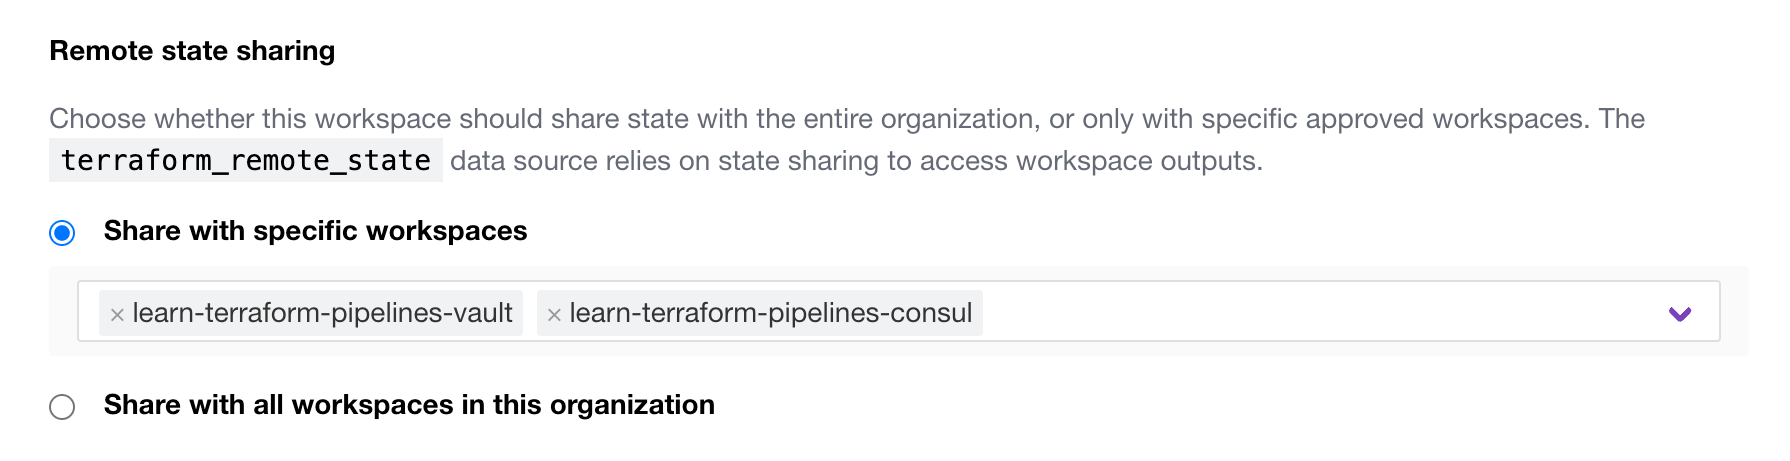 Enable remote state access on the workspace's settings page under general. Type in the workspace's name or select it from the Share with selected workspaces dropdown menu.